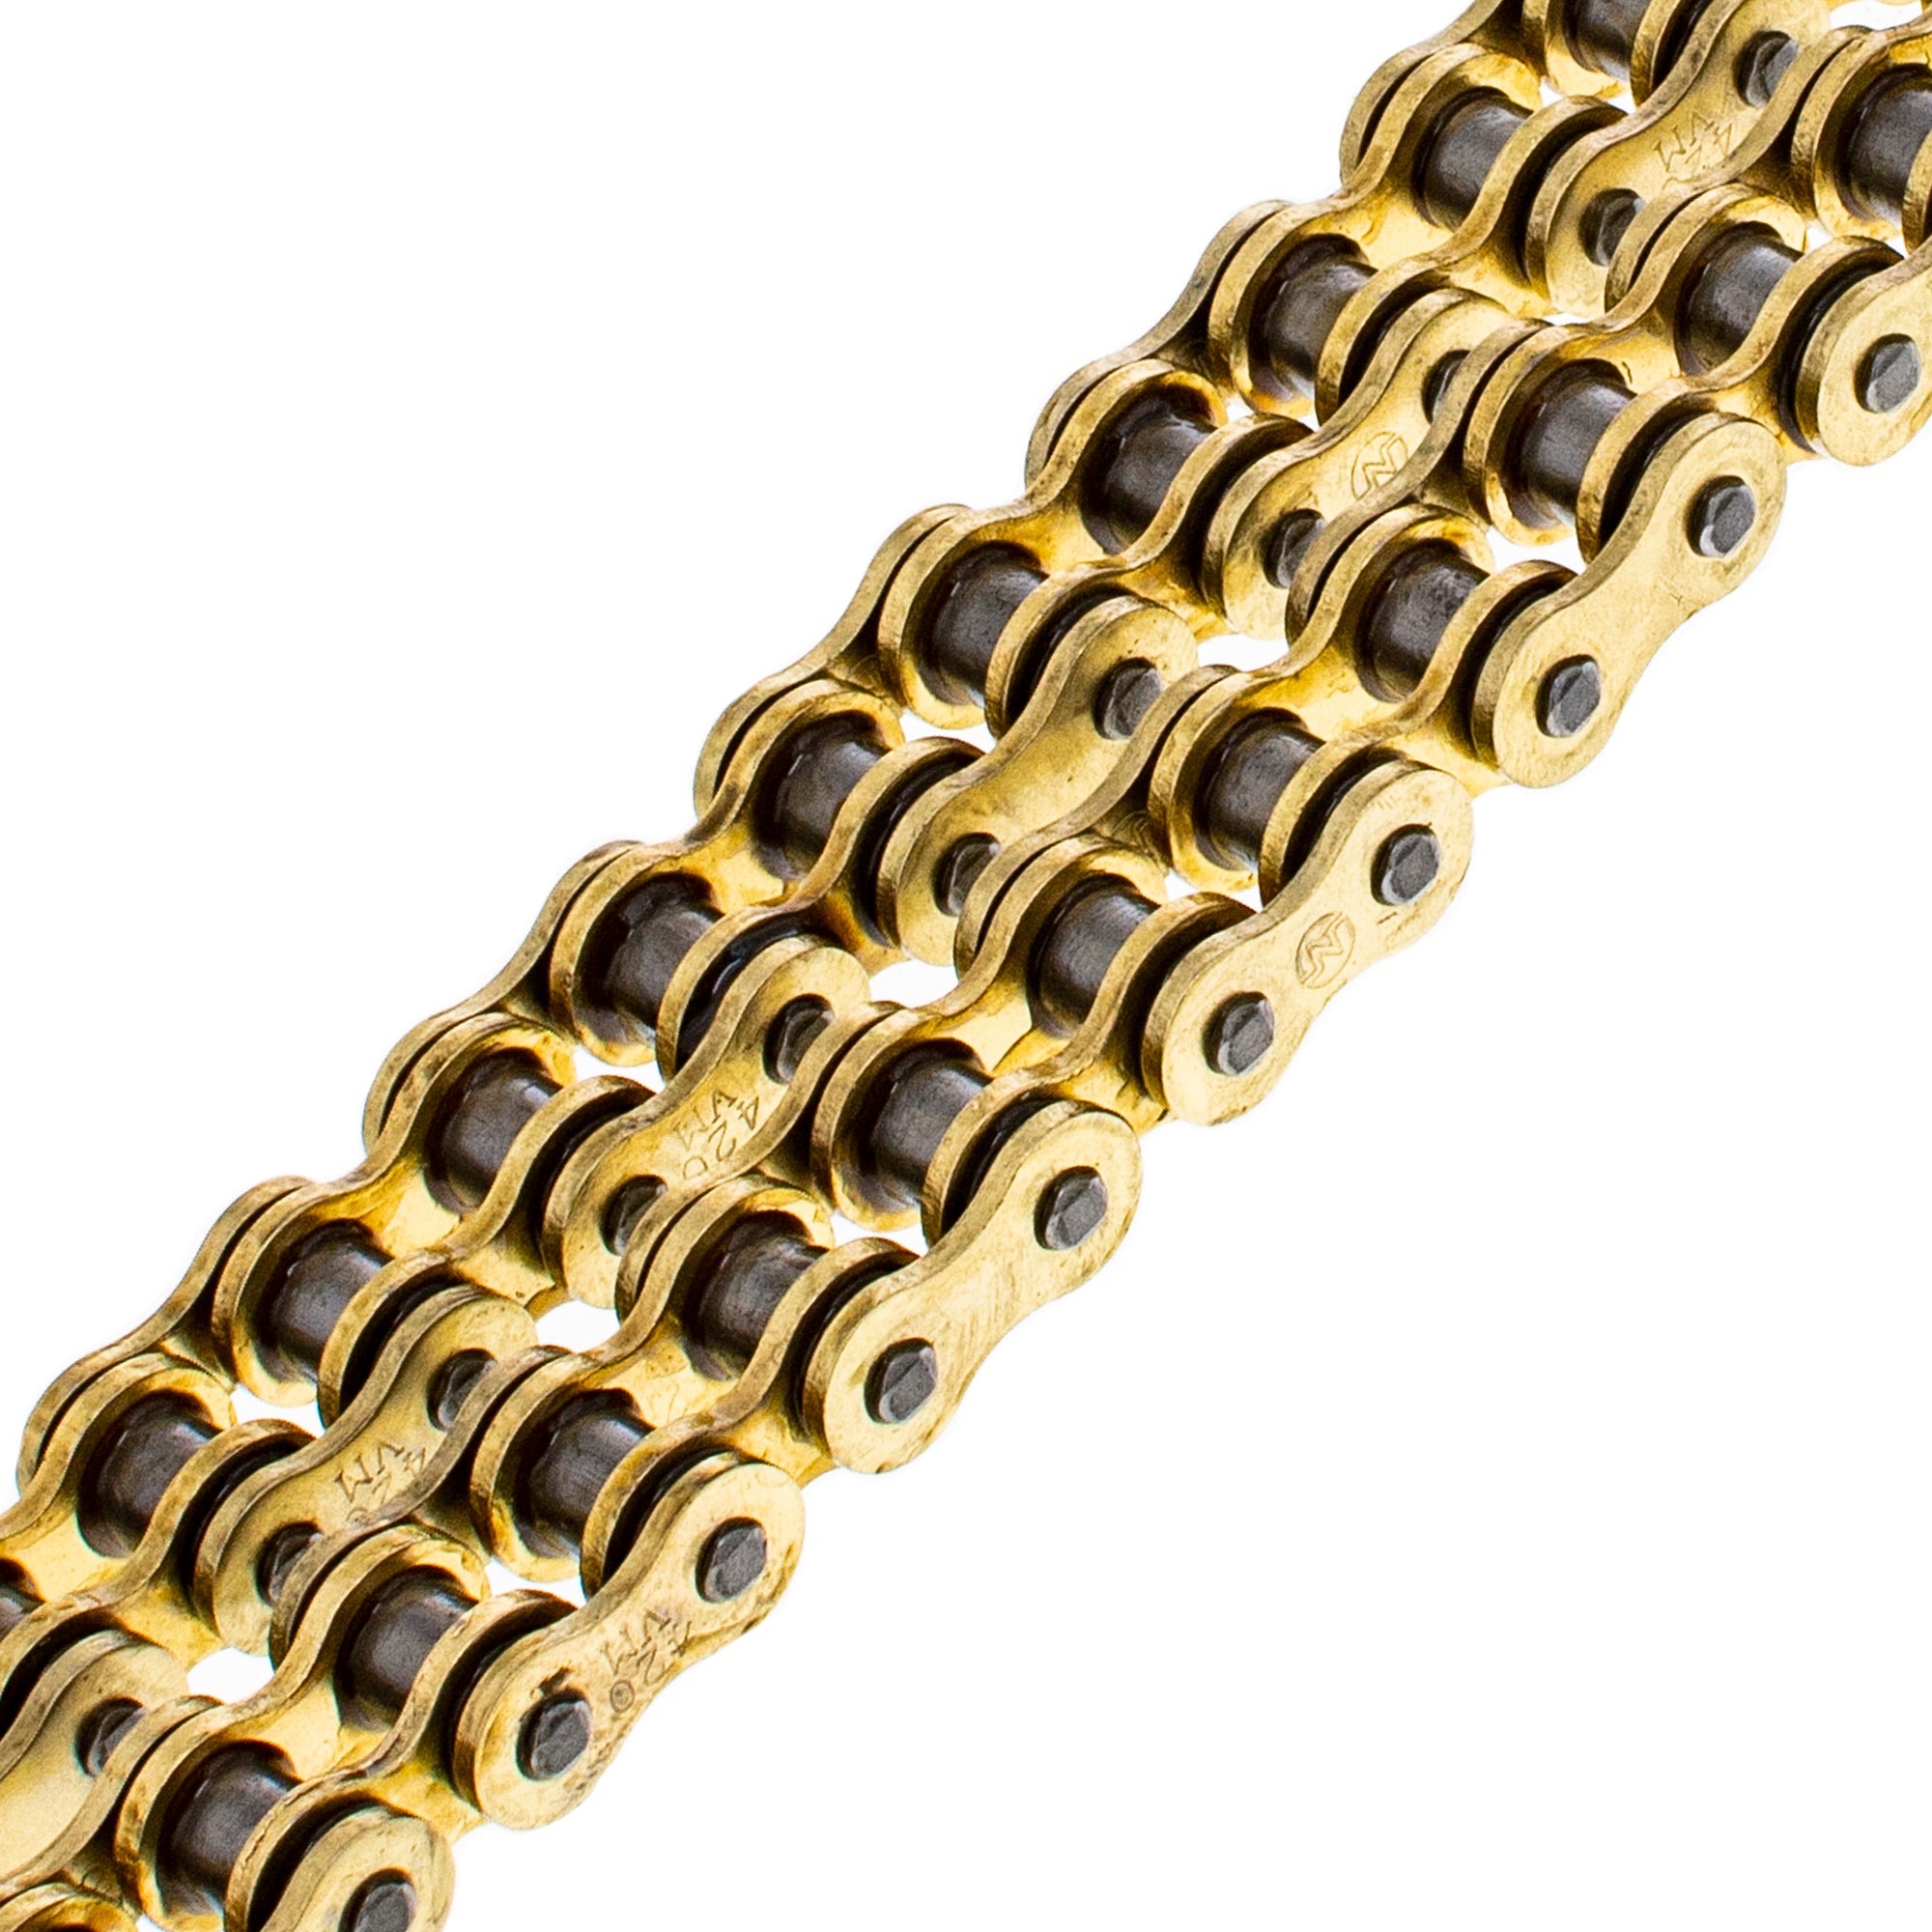 Gold X-Ring Chain 72 w/ Master Link for zOTHER FourTrax ATC70 5442 NICHE 519-CDC2553H